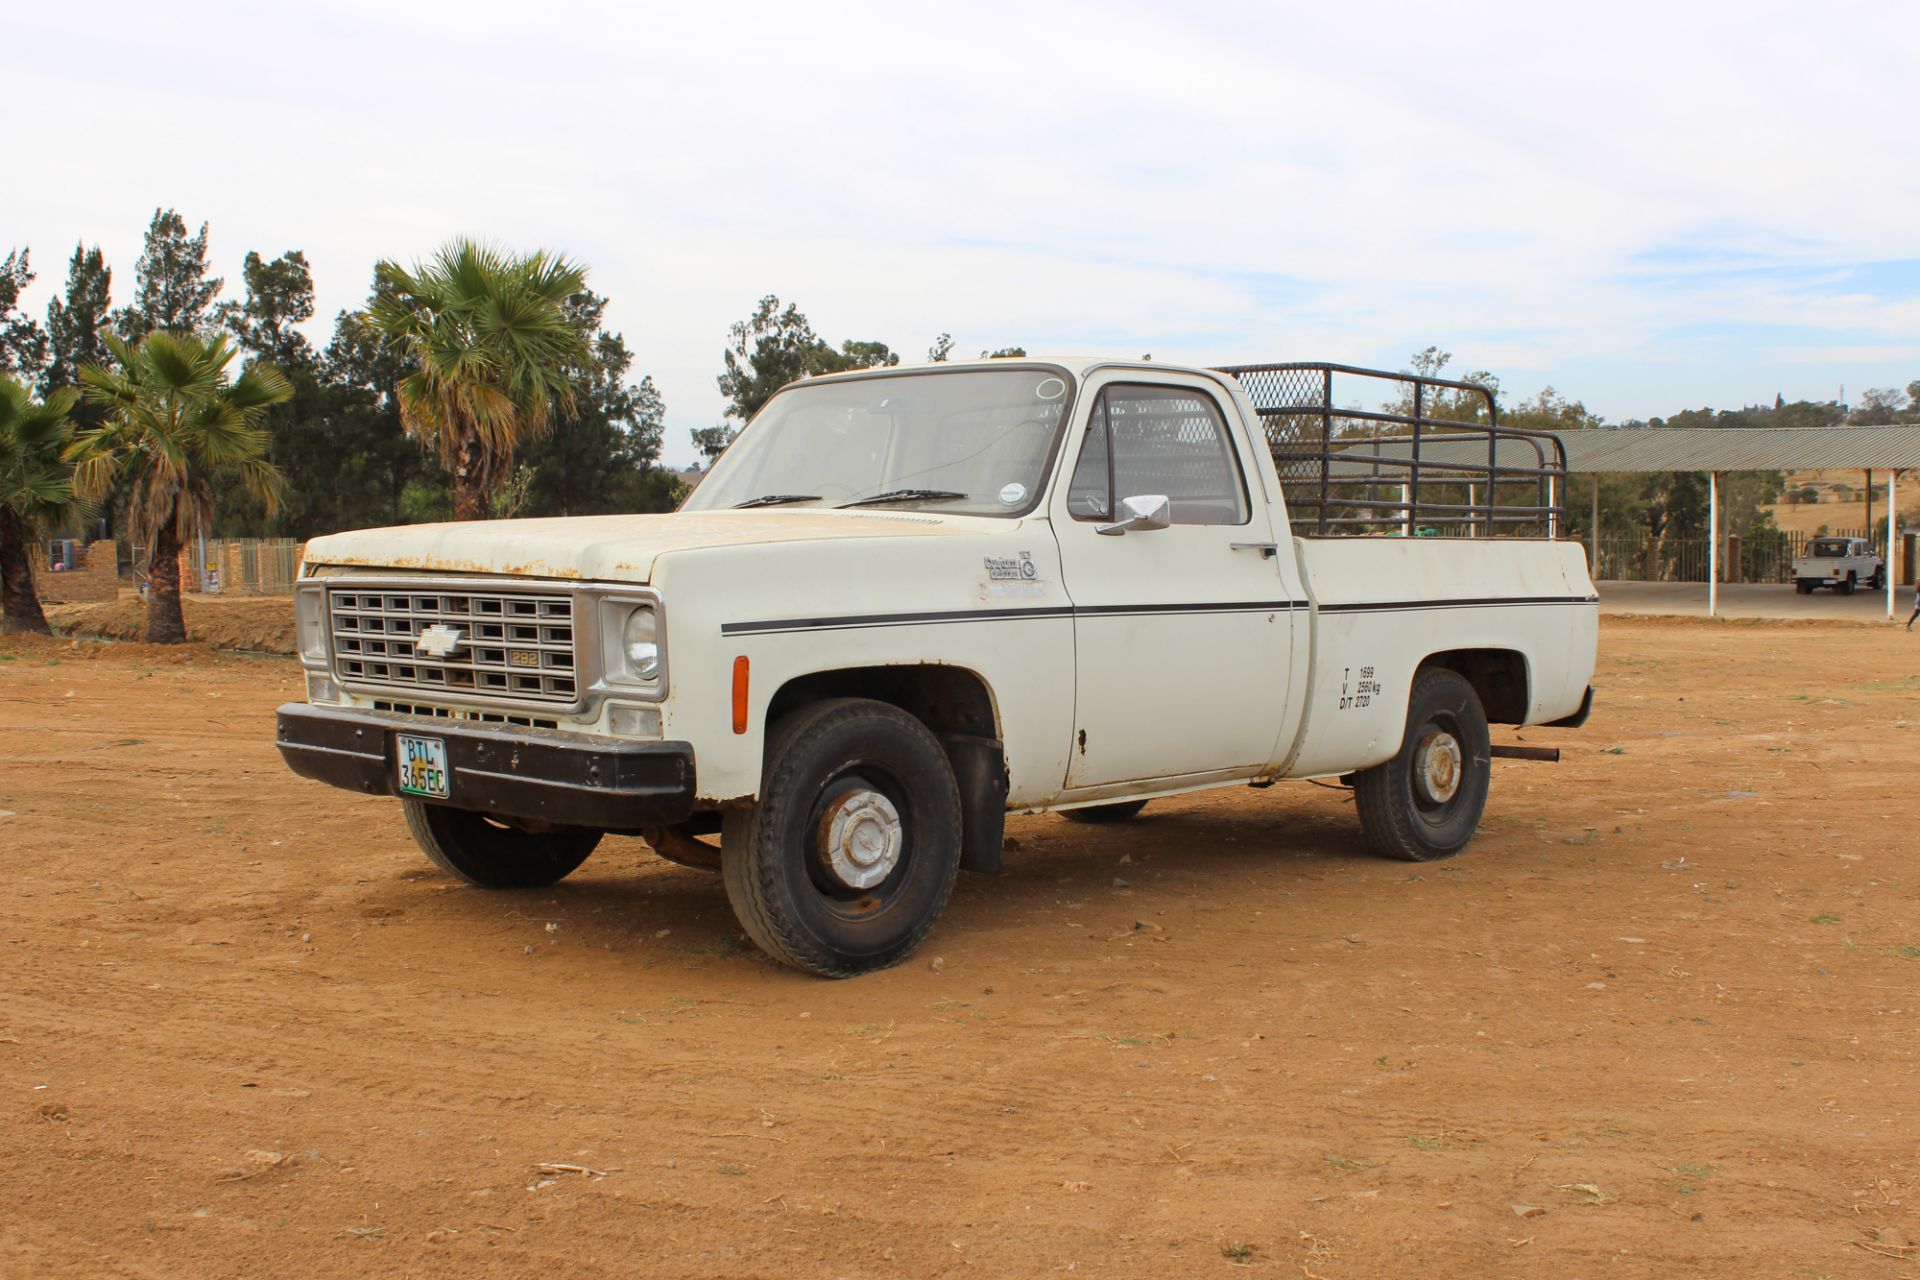 1974 CHEV SINGLE AXLE PICK-UP C10 - Image 2 of 6